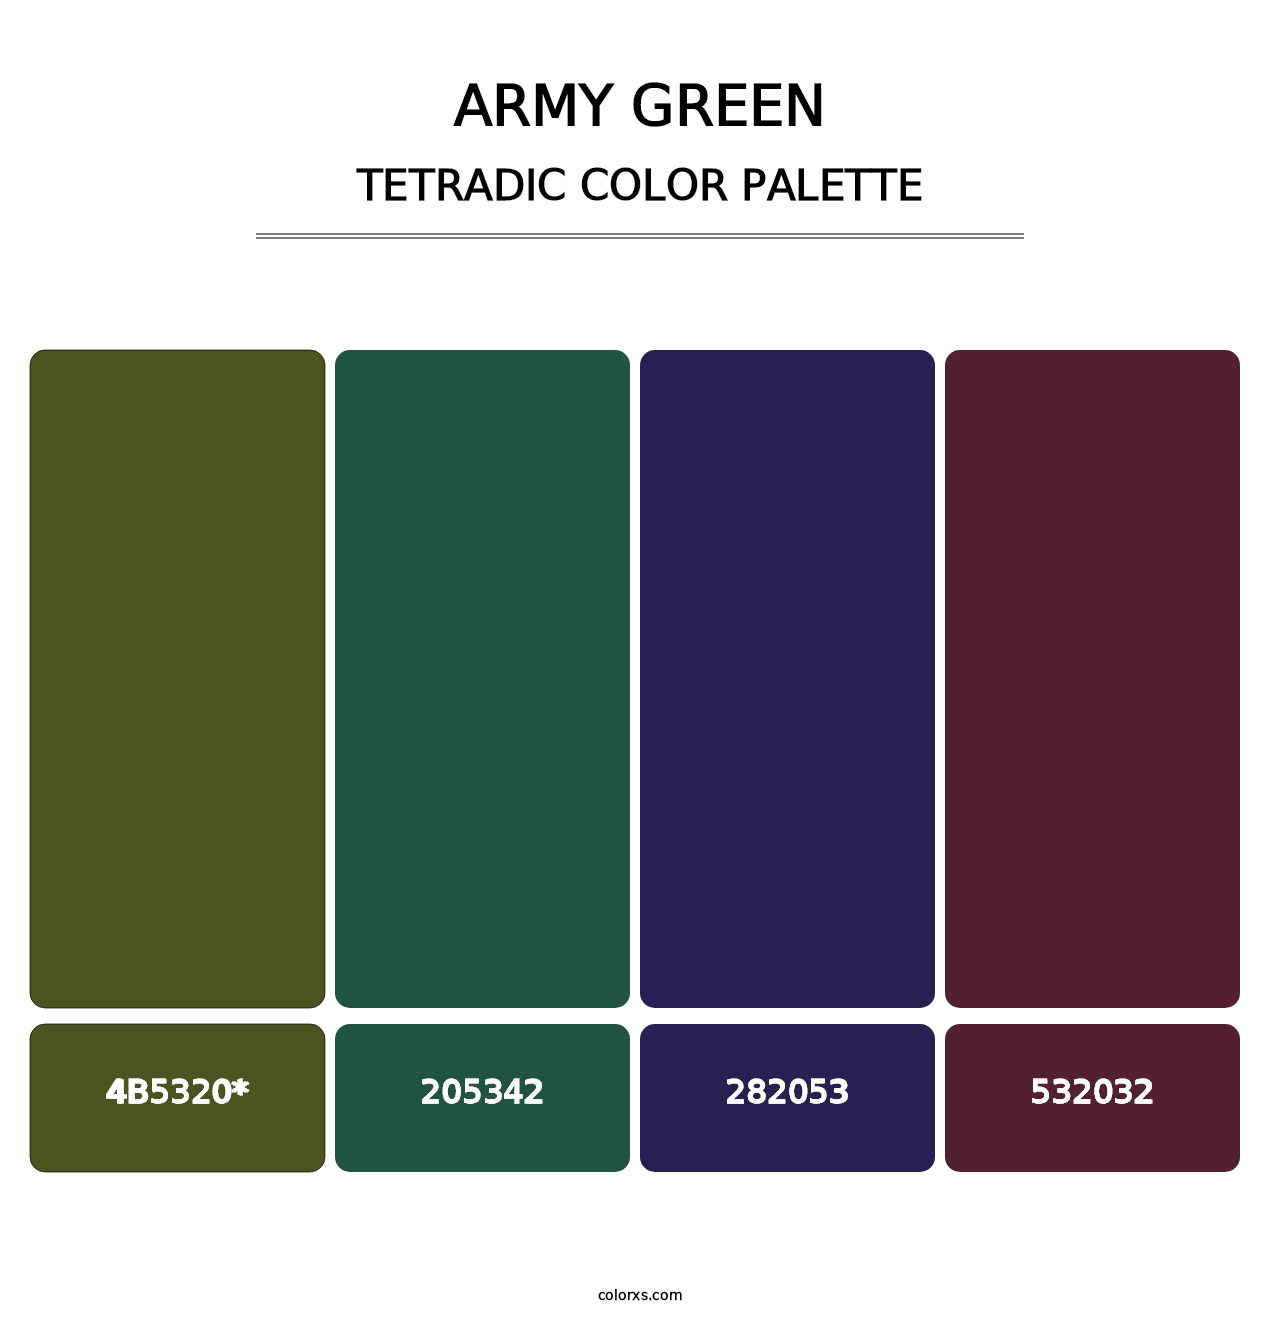 Army Green - Tetradic Color Palette